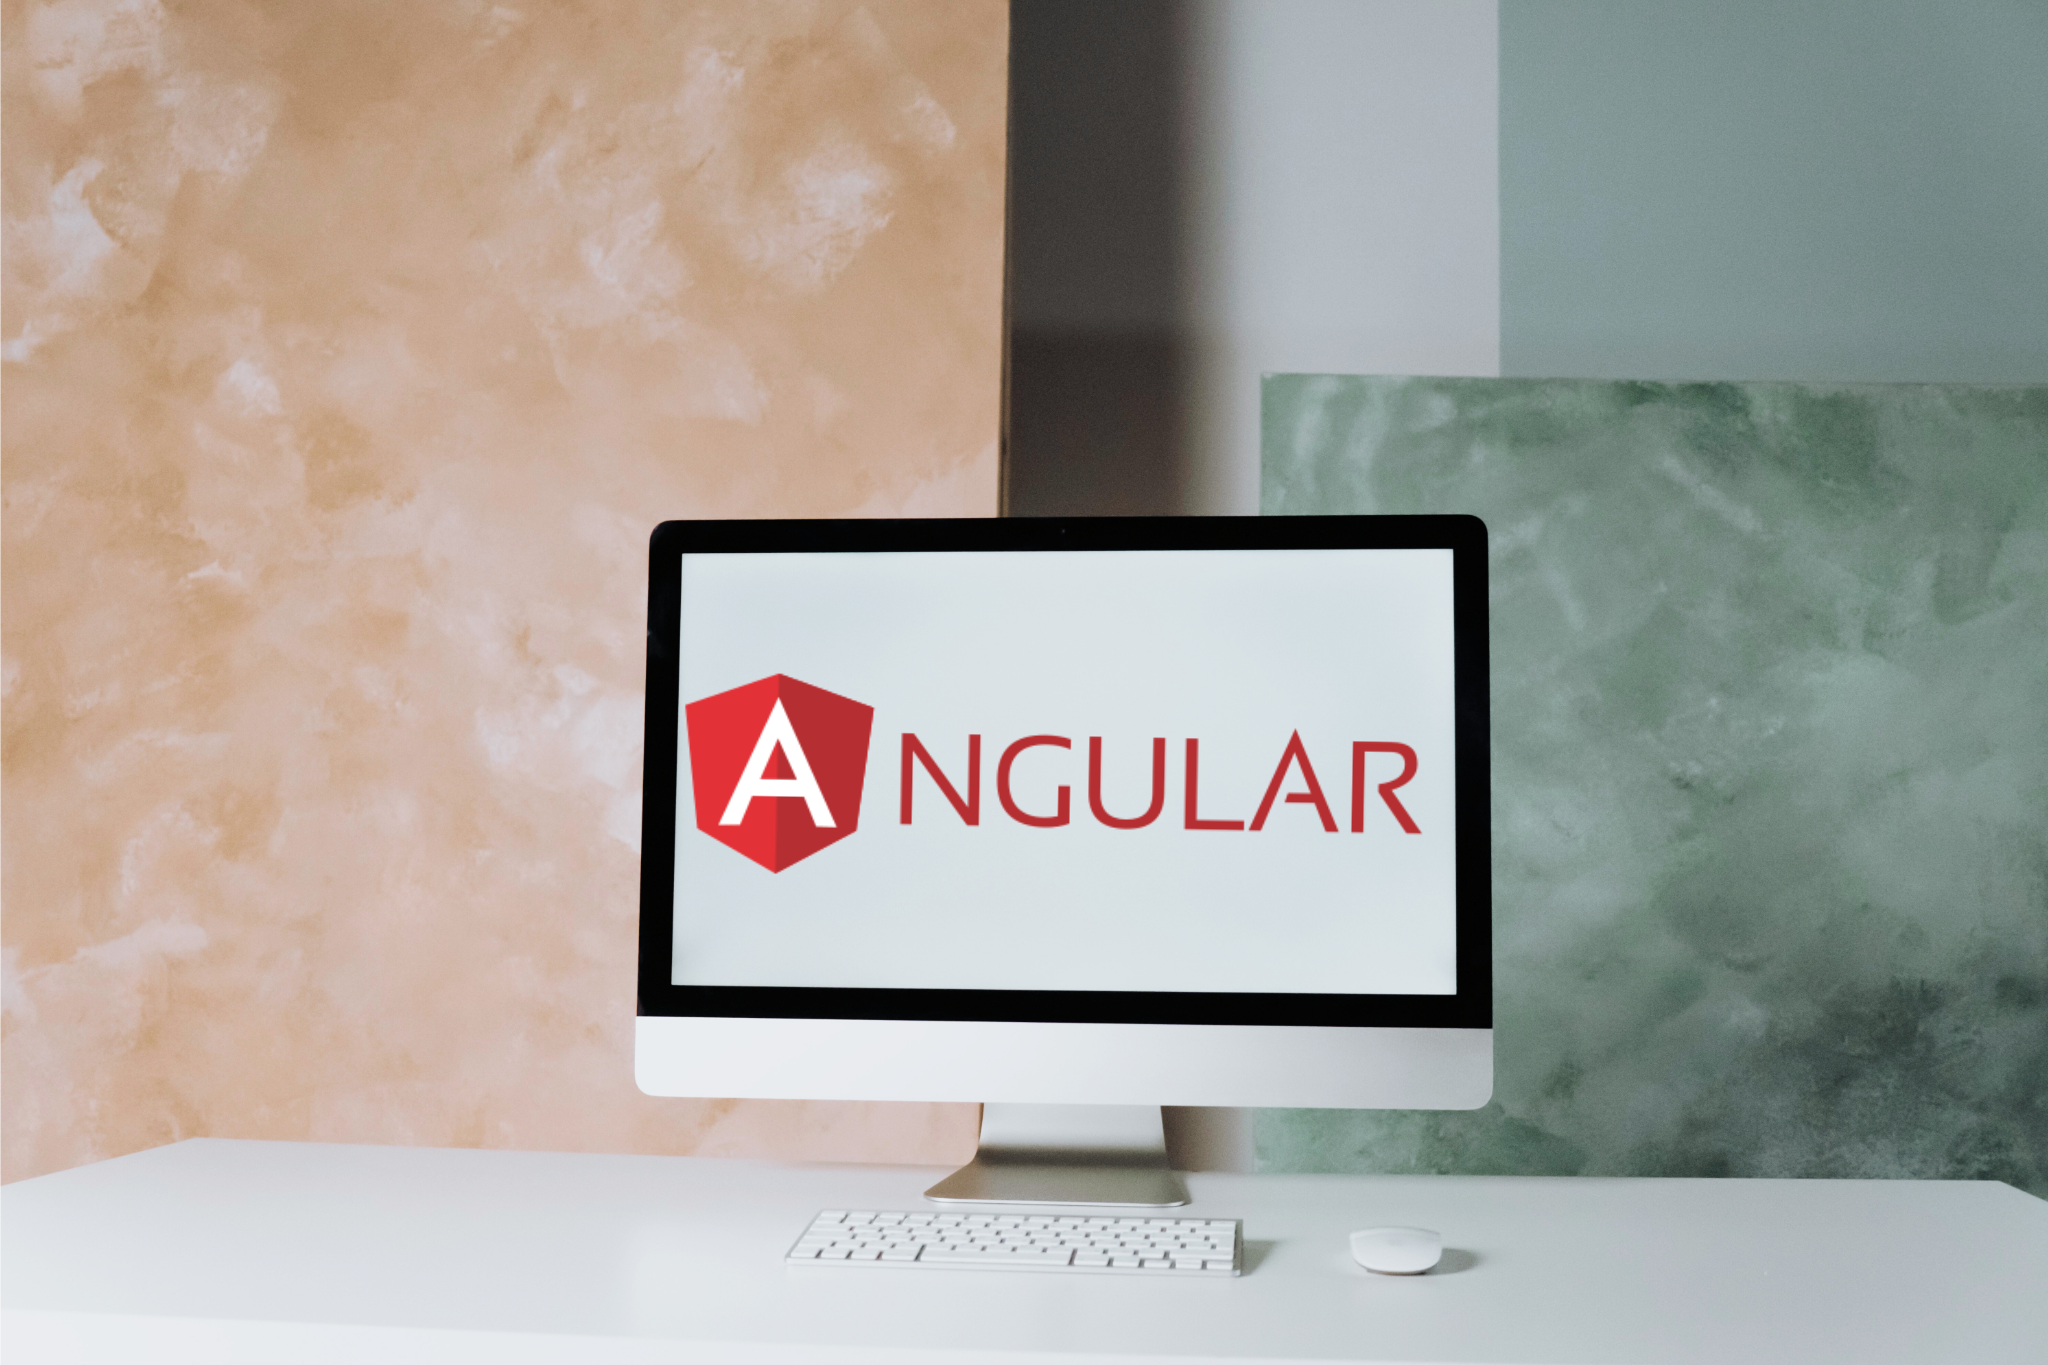 Angular: The Premier Solution for Single Page Application (SPA) Development